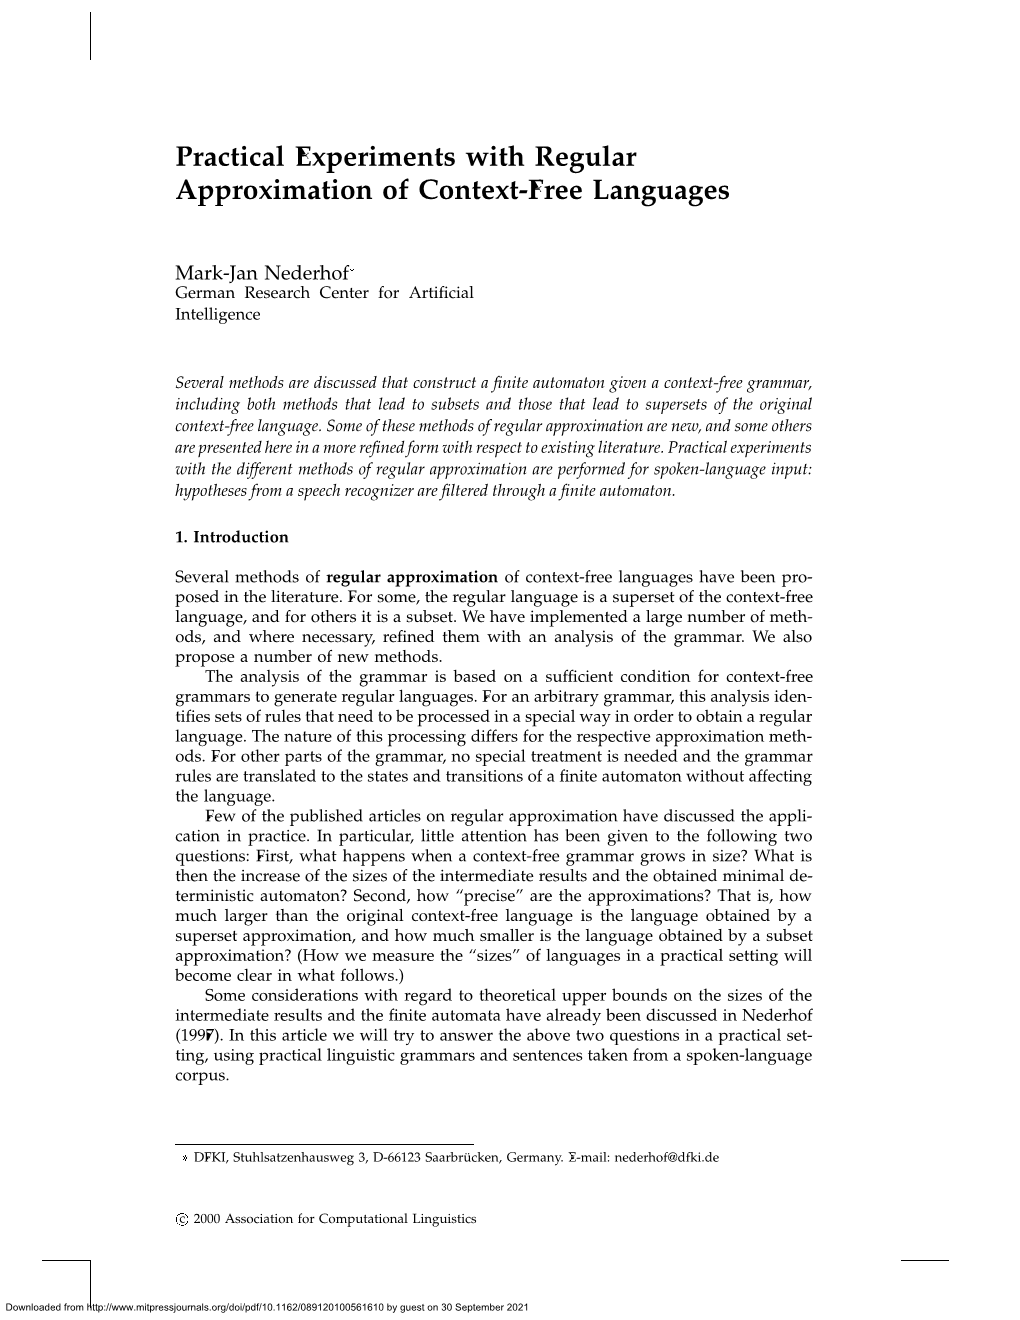 Practical Experiments with Regular Approximation of Context-Free Languages